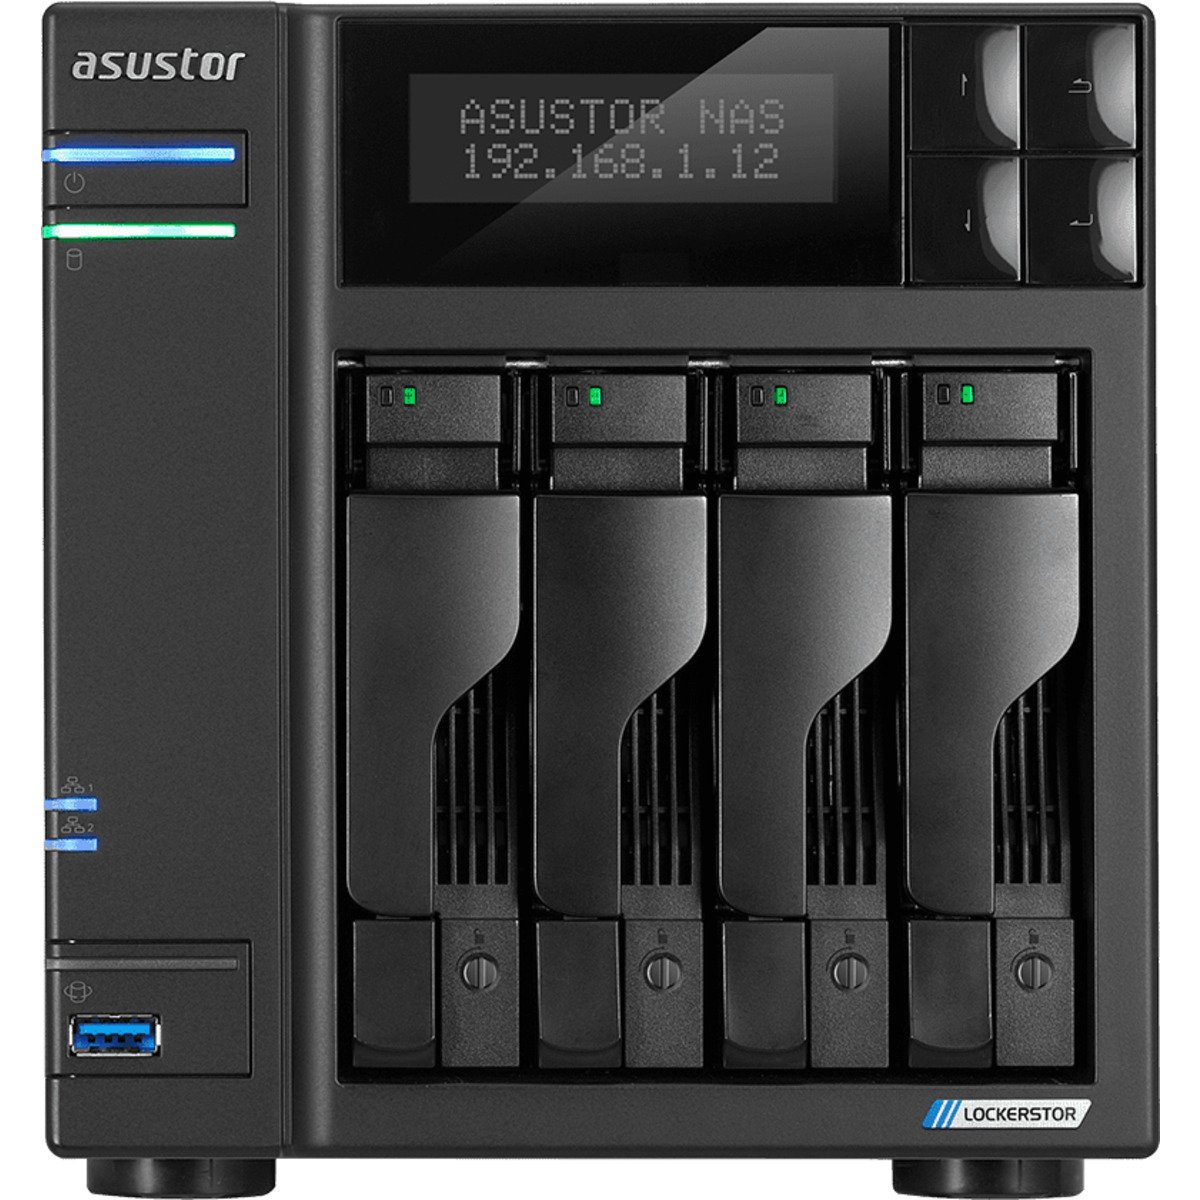 ASUSTOR AS6604T Lockerstor 4 16tb 4-Bay Desktop Multimedia / Power User / Business NAS - Network Attached Storage Device 4x4tb Sandisk Ultra 3D SDSSDH3-4T00 2.5 560/520MB/s SATA 6Gb/s SSD CONSUMER Class Drives Installed - Burn-In Tested - FREE RAM UPGRADE AS6604T Lockerstor 4